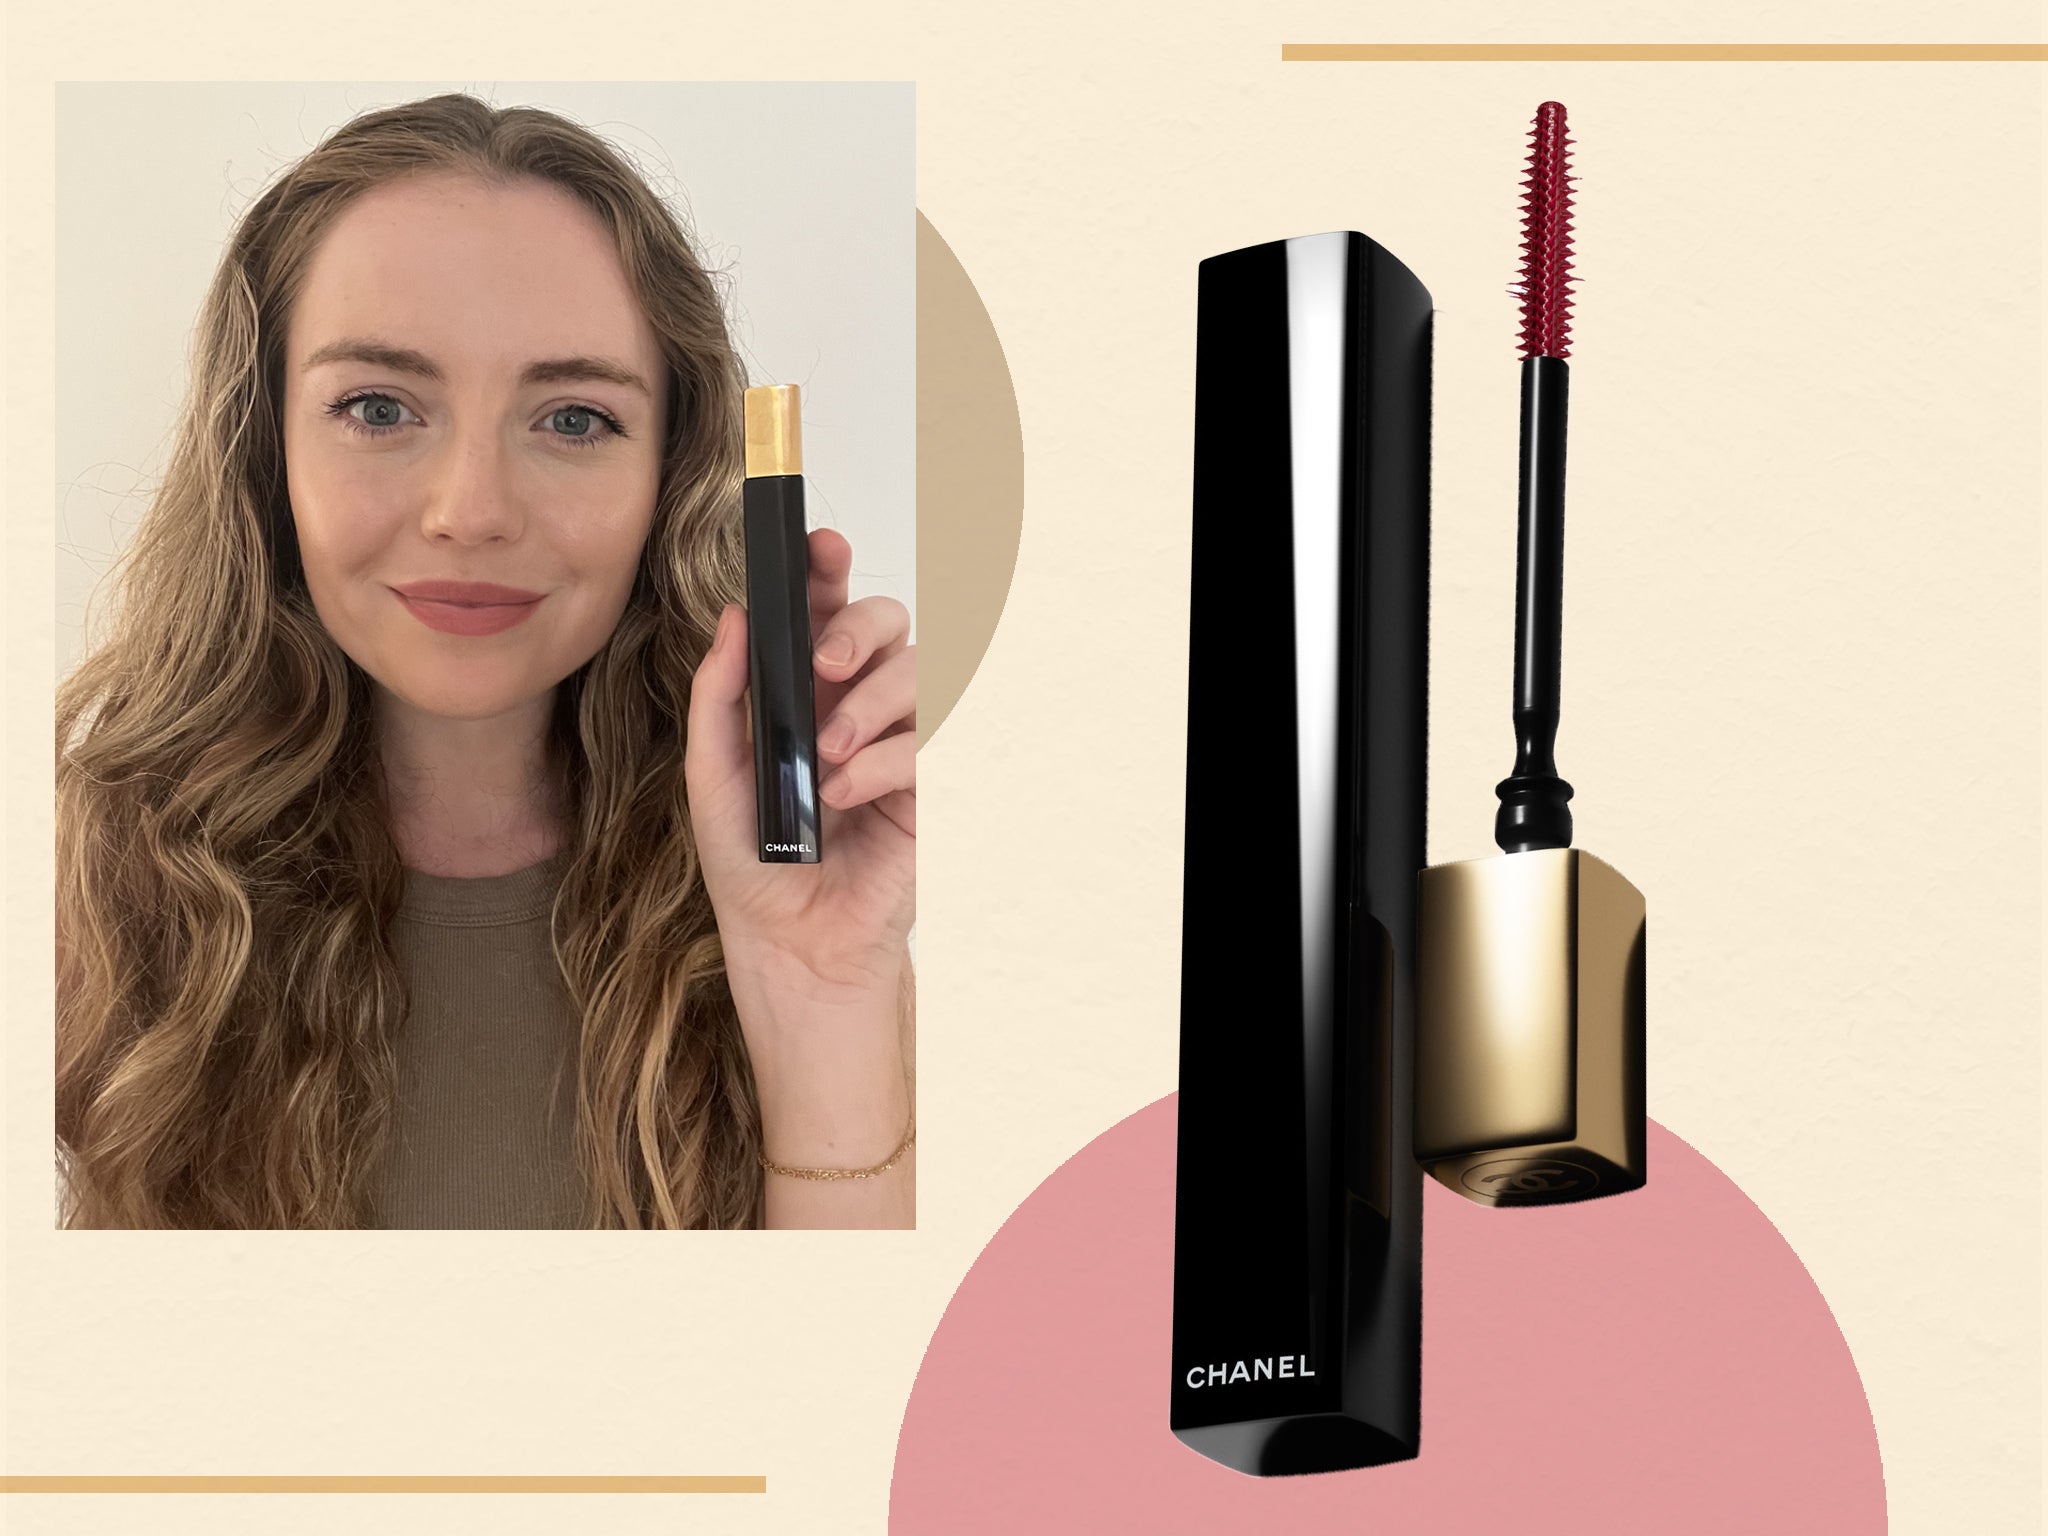 CHANEL | NOIR ALLURE - Mascara Volume, Lenght, Curl And Definition